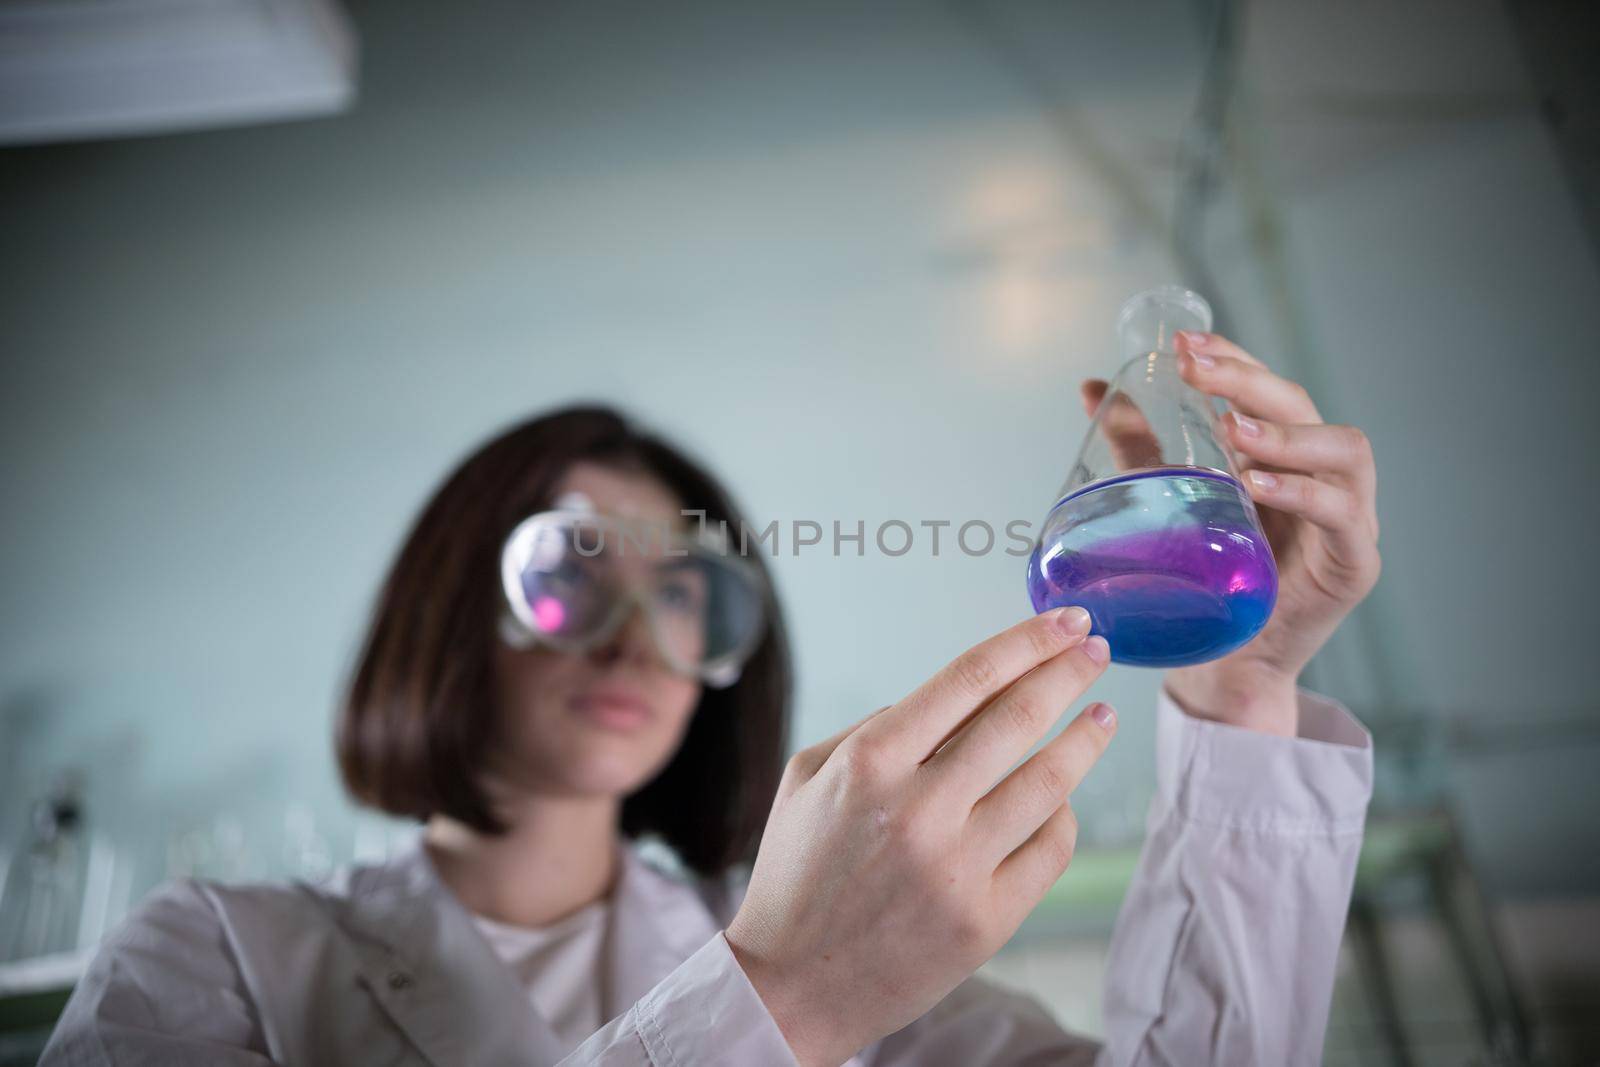 Chemical laboratory. Young woman holding a flask with blue and purple exfoliating liquid in it. Flask in focus